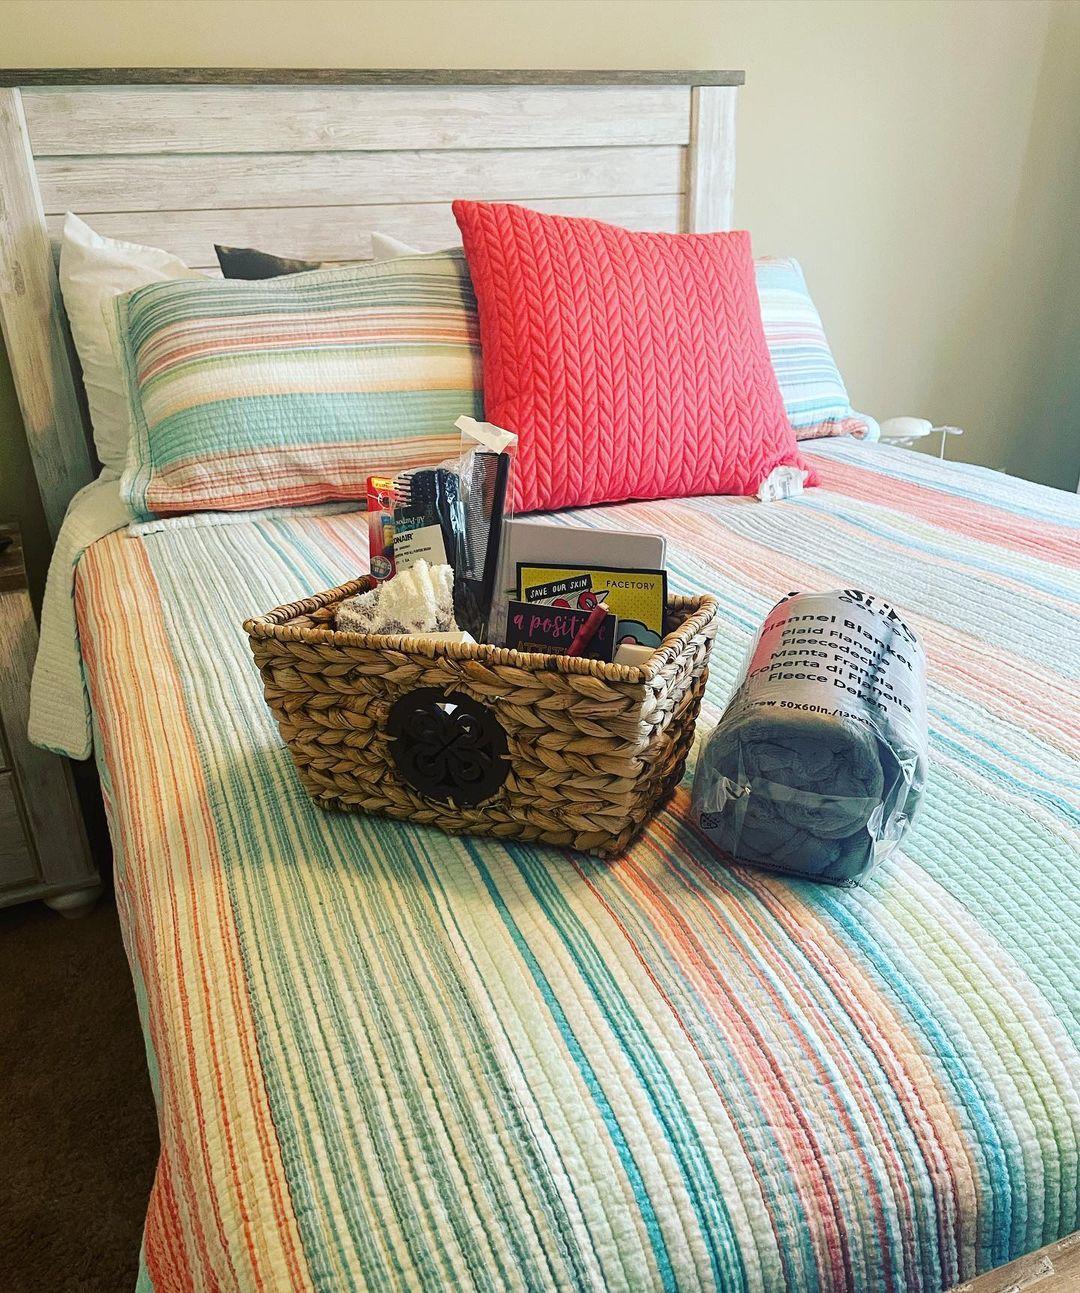 A welcome basket containing some crayons, colors, and drawing papers. (Courtesy of <a href="https://www.instagram.com/fostertheteens/">Brittany Burcham</a>)